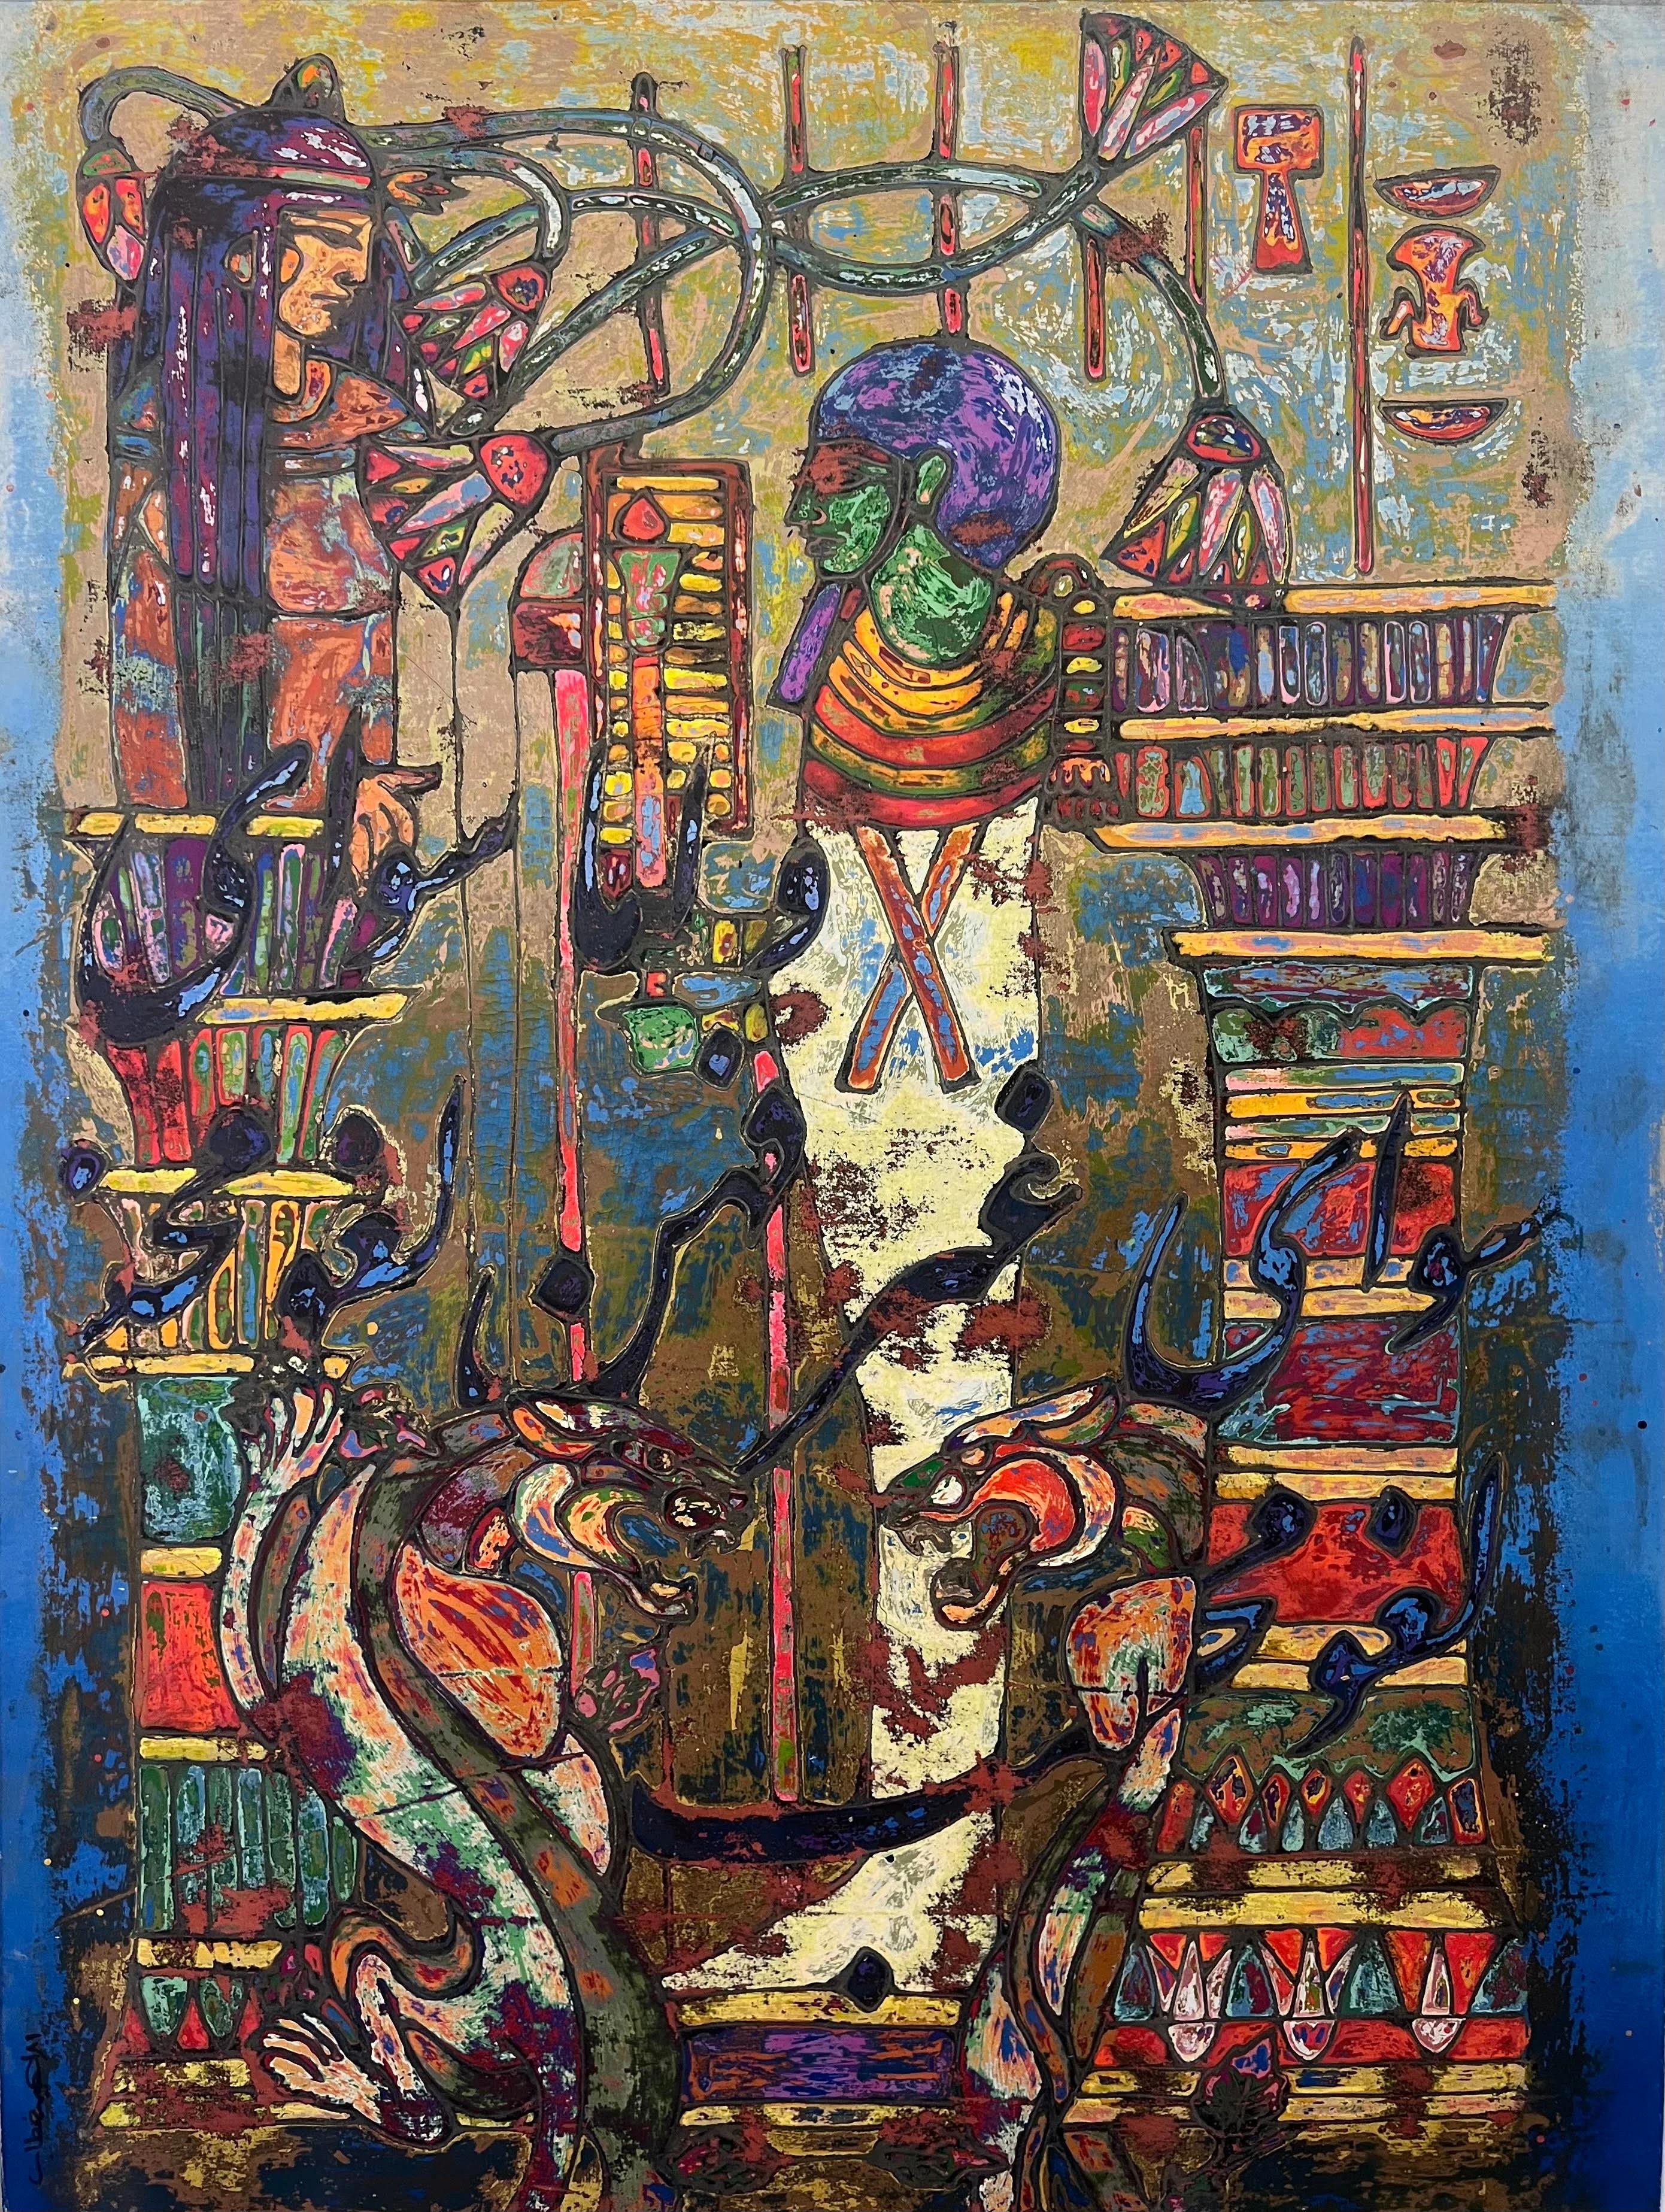 "Pharaoh's Crypt" Abstract Painting 59" x 43" in by Ibrahim Khatab

mixed media on wood

Ibrahim Khatab was born in Cairo 1984, works as a co-teacher in Cairo University, he mixes between painting, video art and installation in his artworks. He